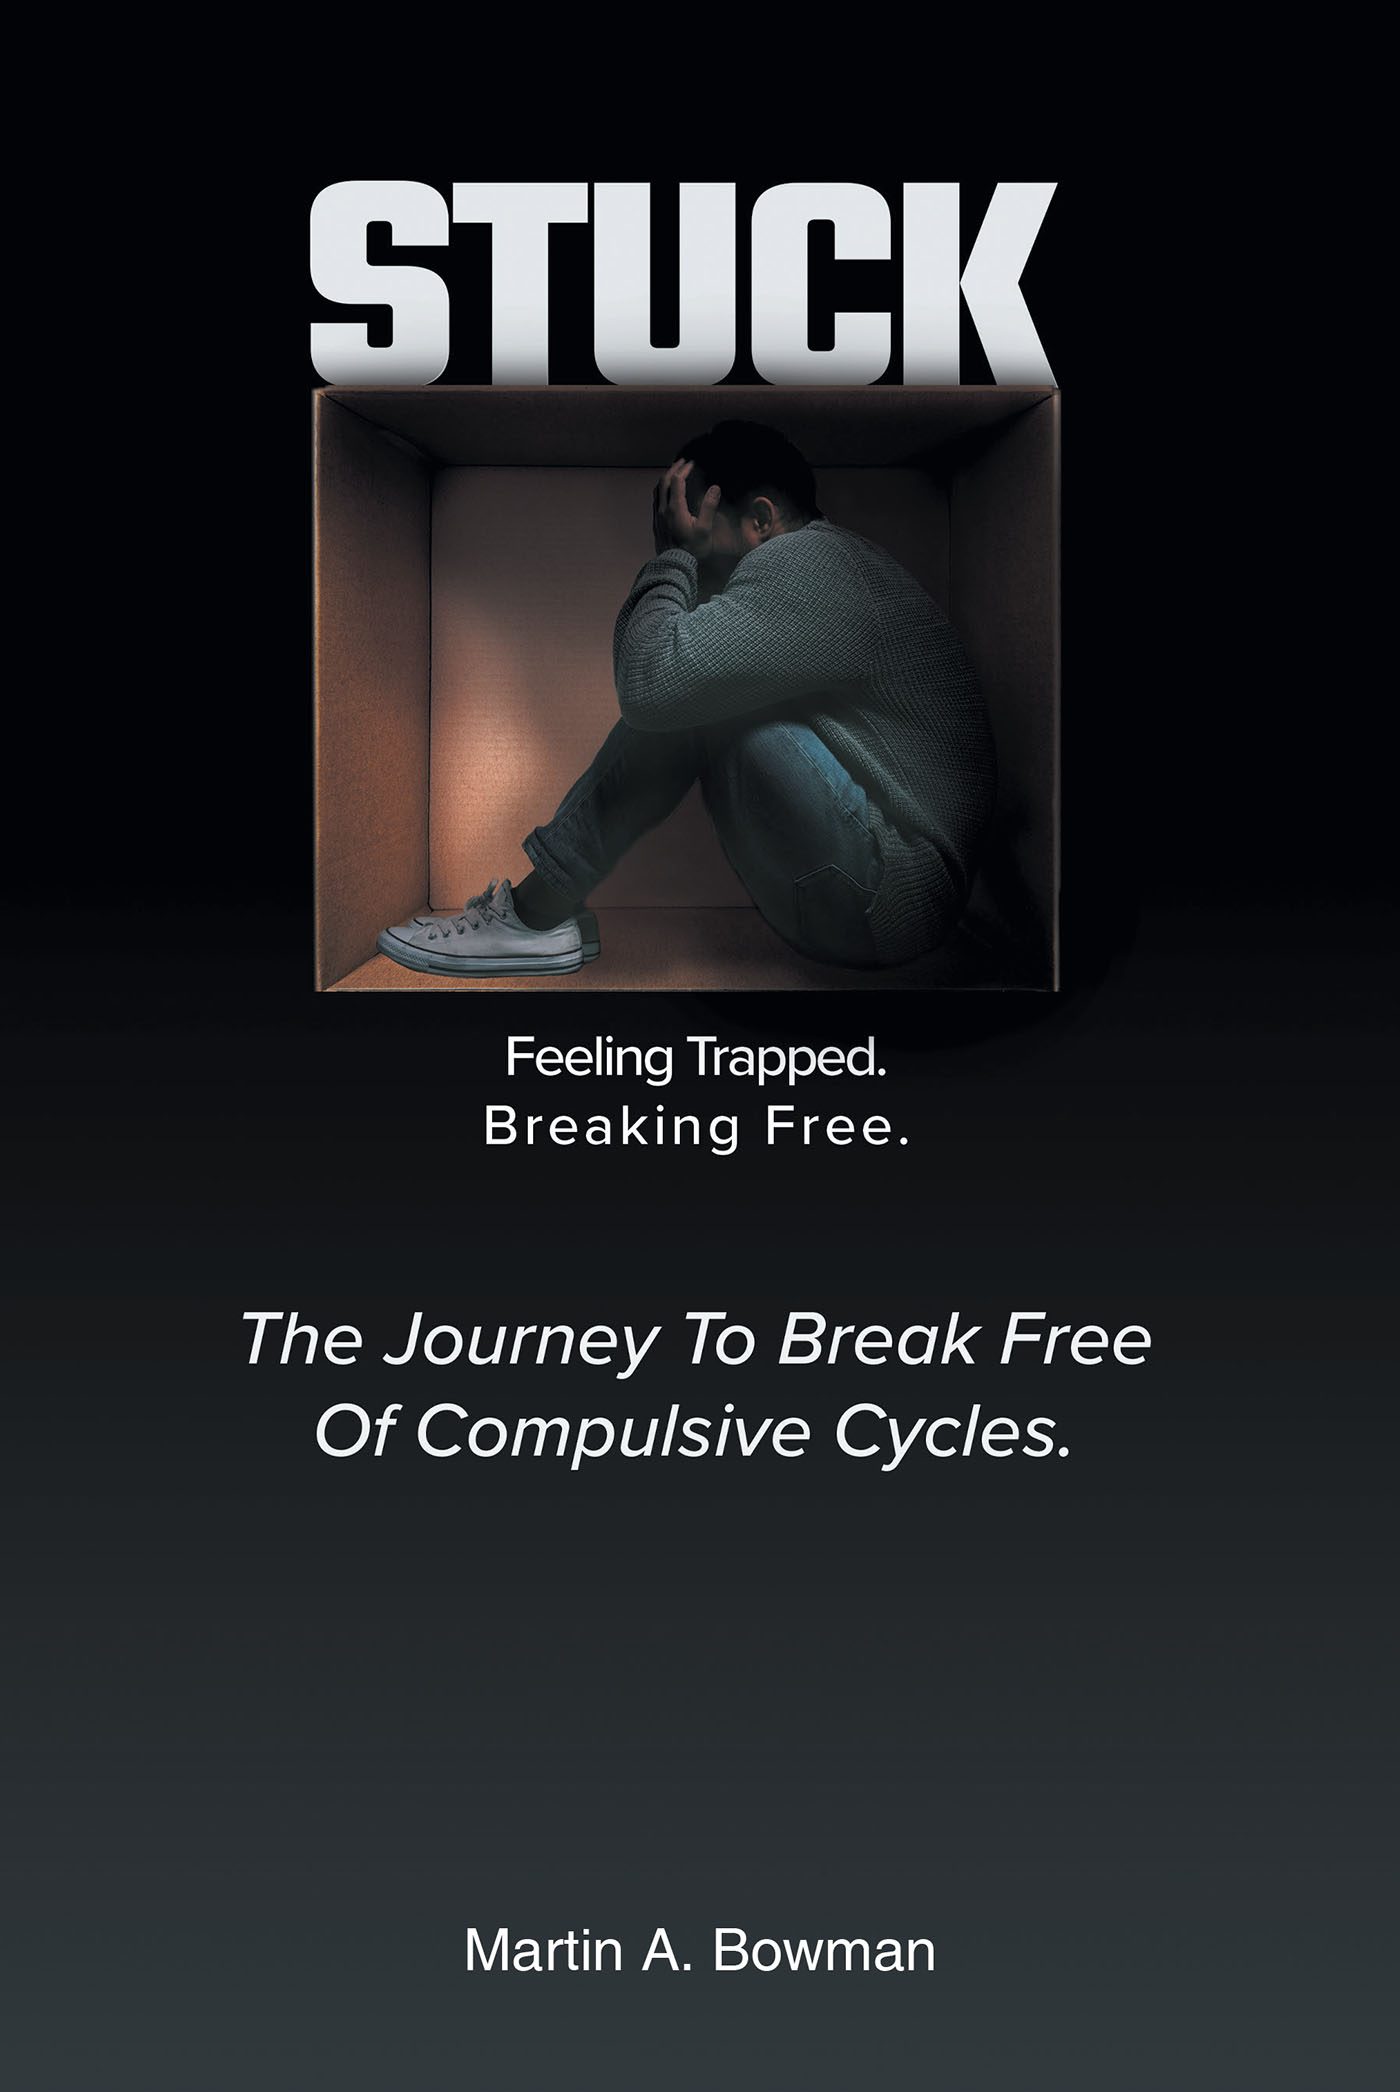 Martin A. Bowman’s Newly Released "Stuck: Feeling Trapped. Breaking Free." is an Informative Discussion of Breaking Bad Habits and Behavioral Cycles